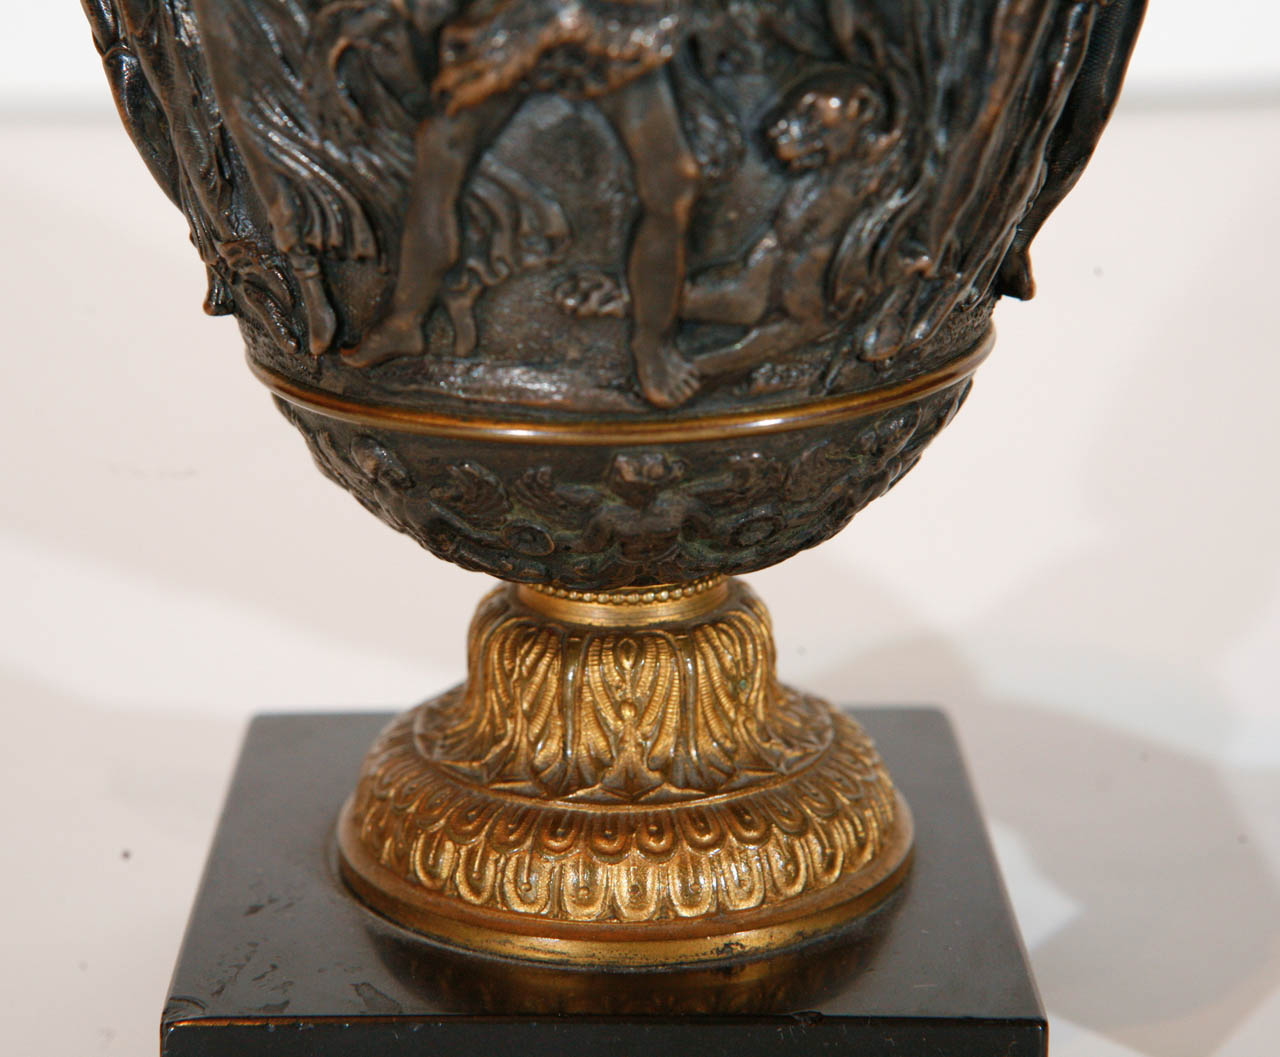 Turn-of-the-Century, Silver and Bronze Urns